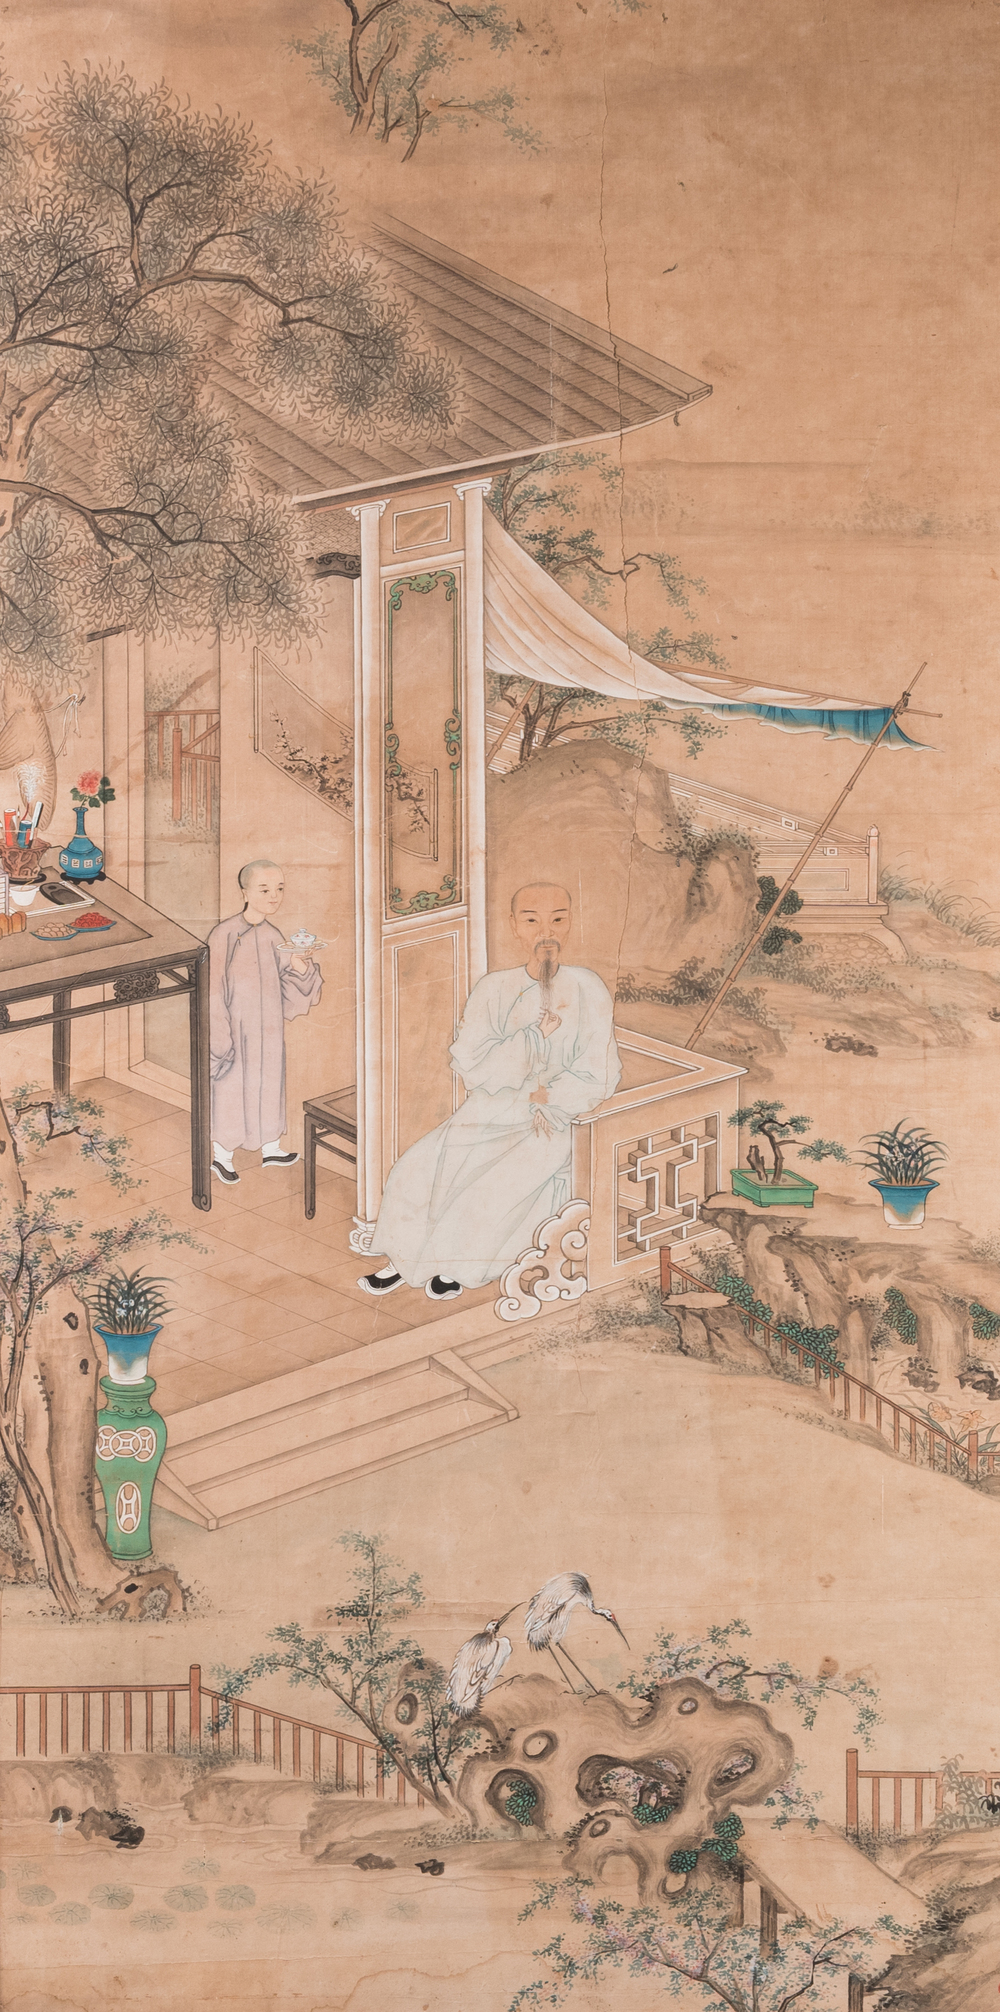 Chinese school: 'A scholar and his servant on a terrace', ink and colour on paper, 18/19th C.